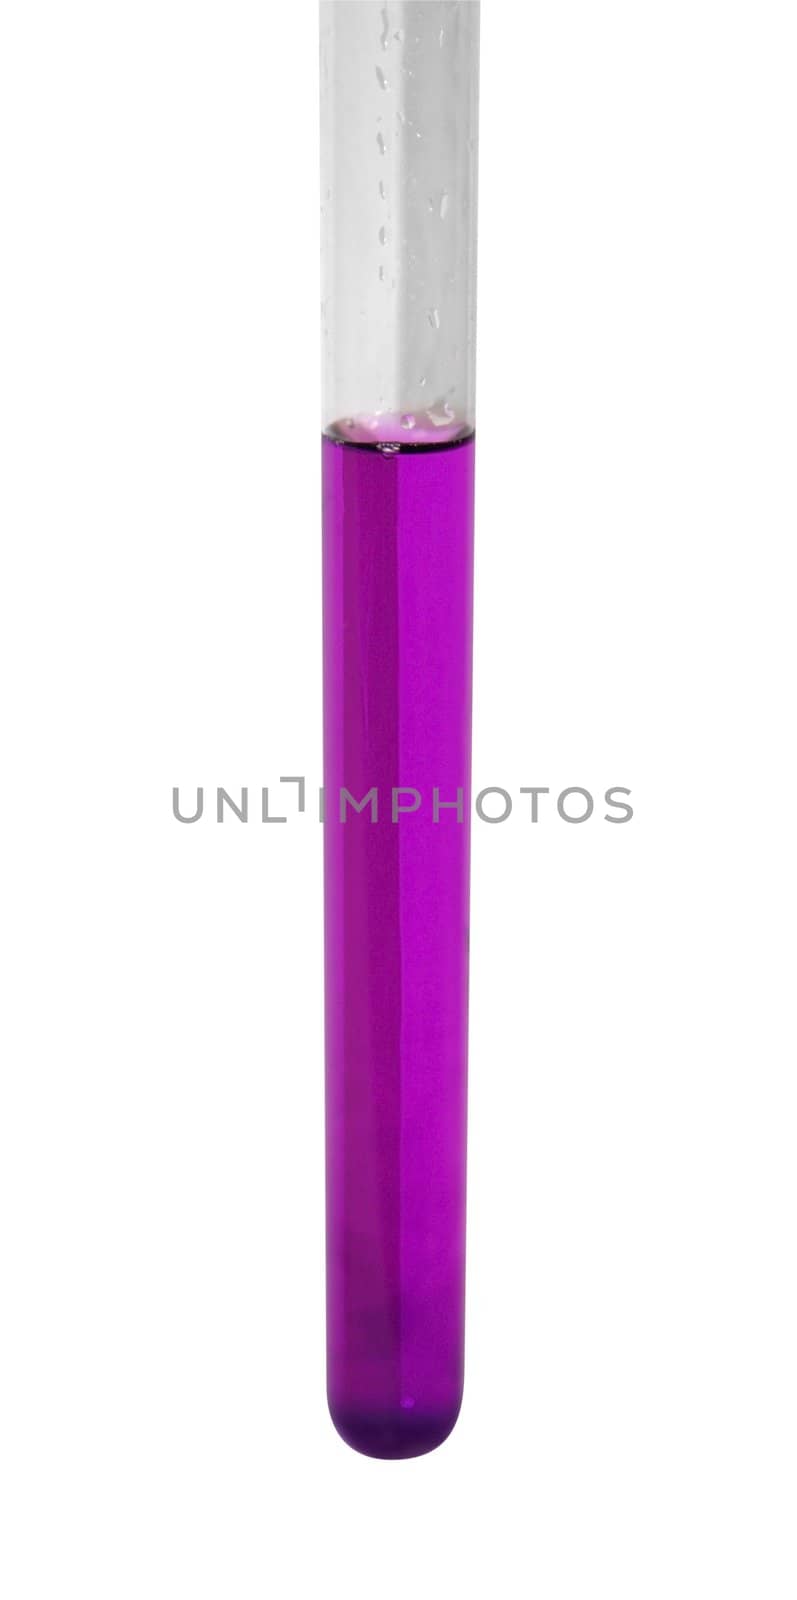 studio photography of a test glass filled with a dilution of potassium permanganate, isolated on white with clipping path